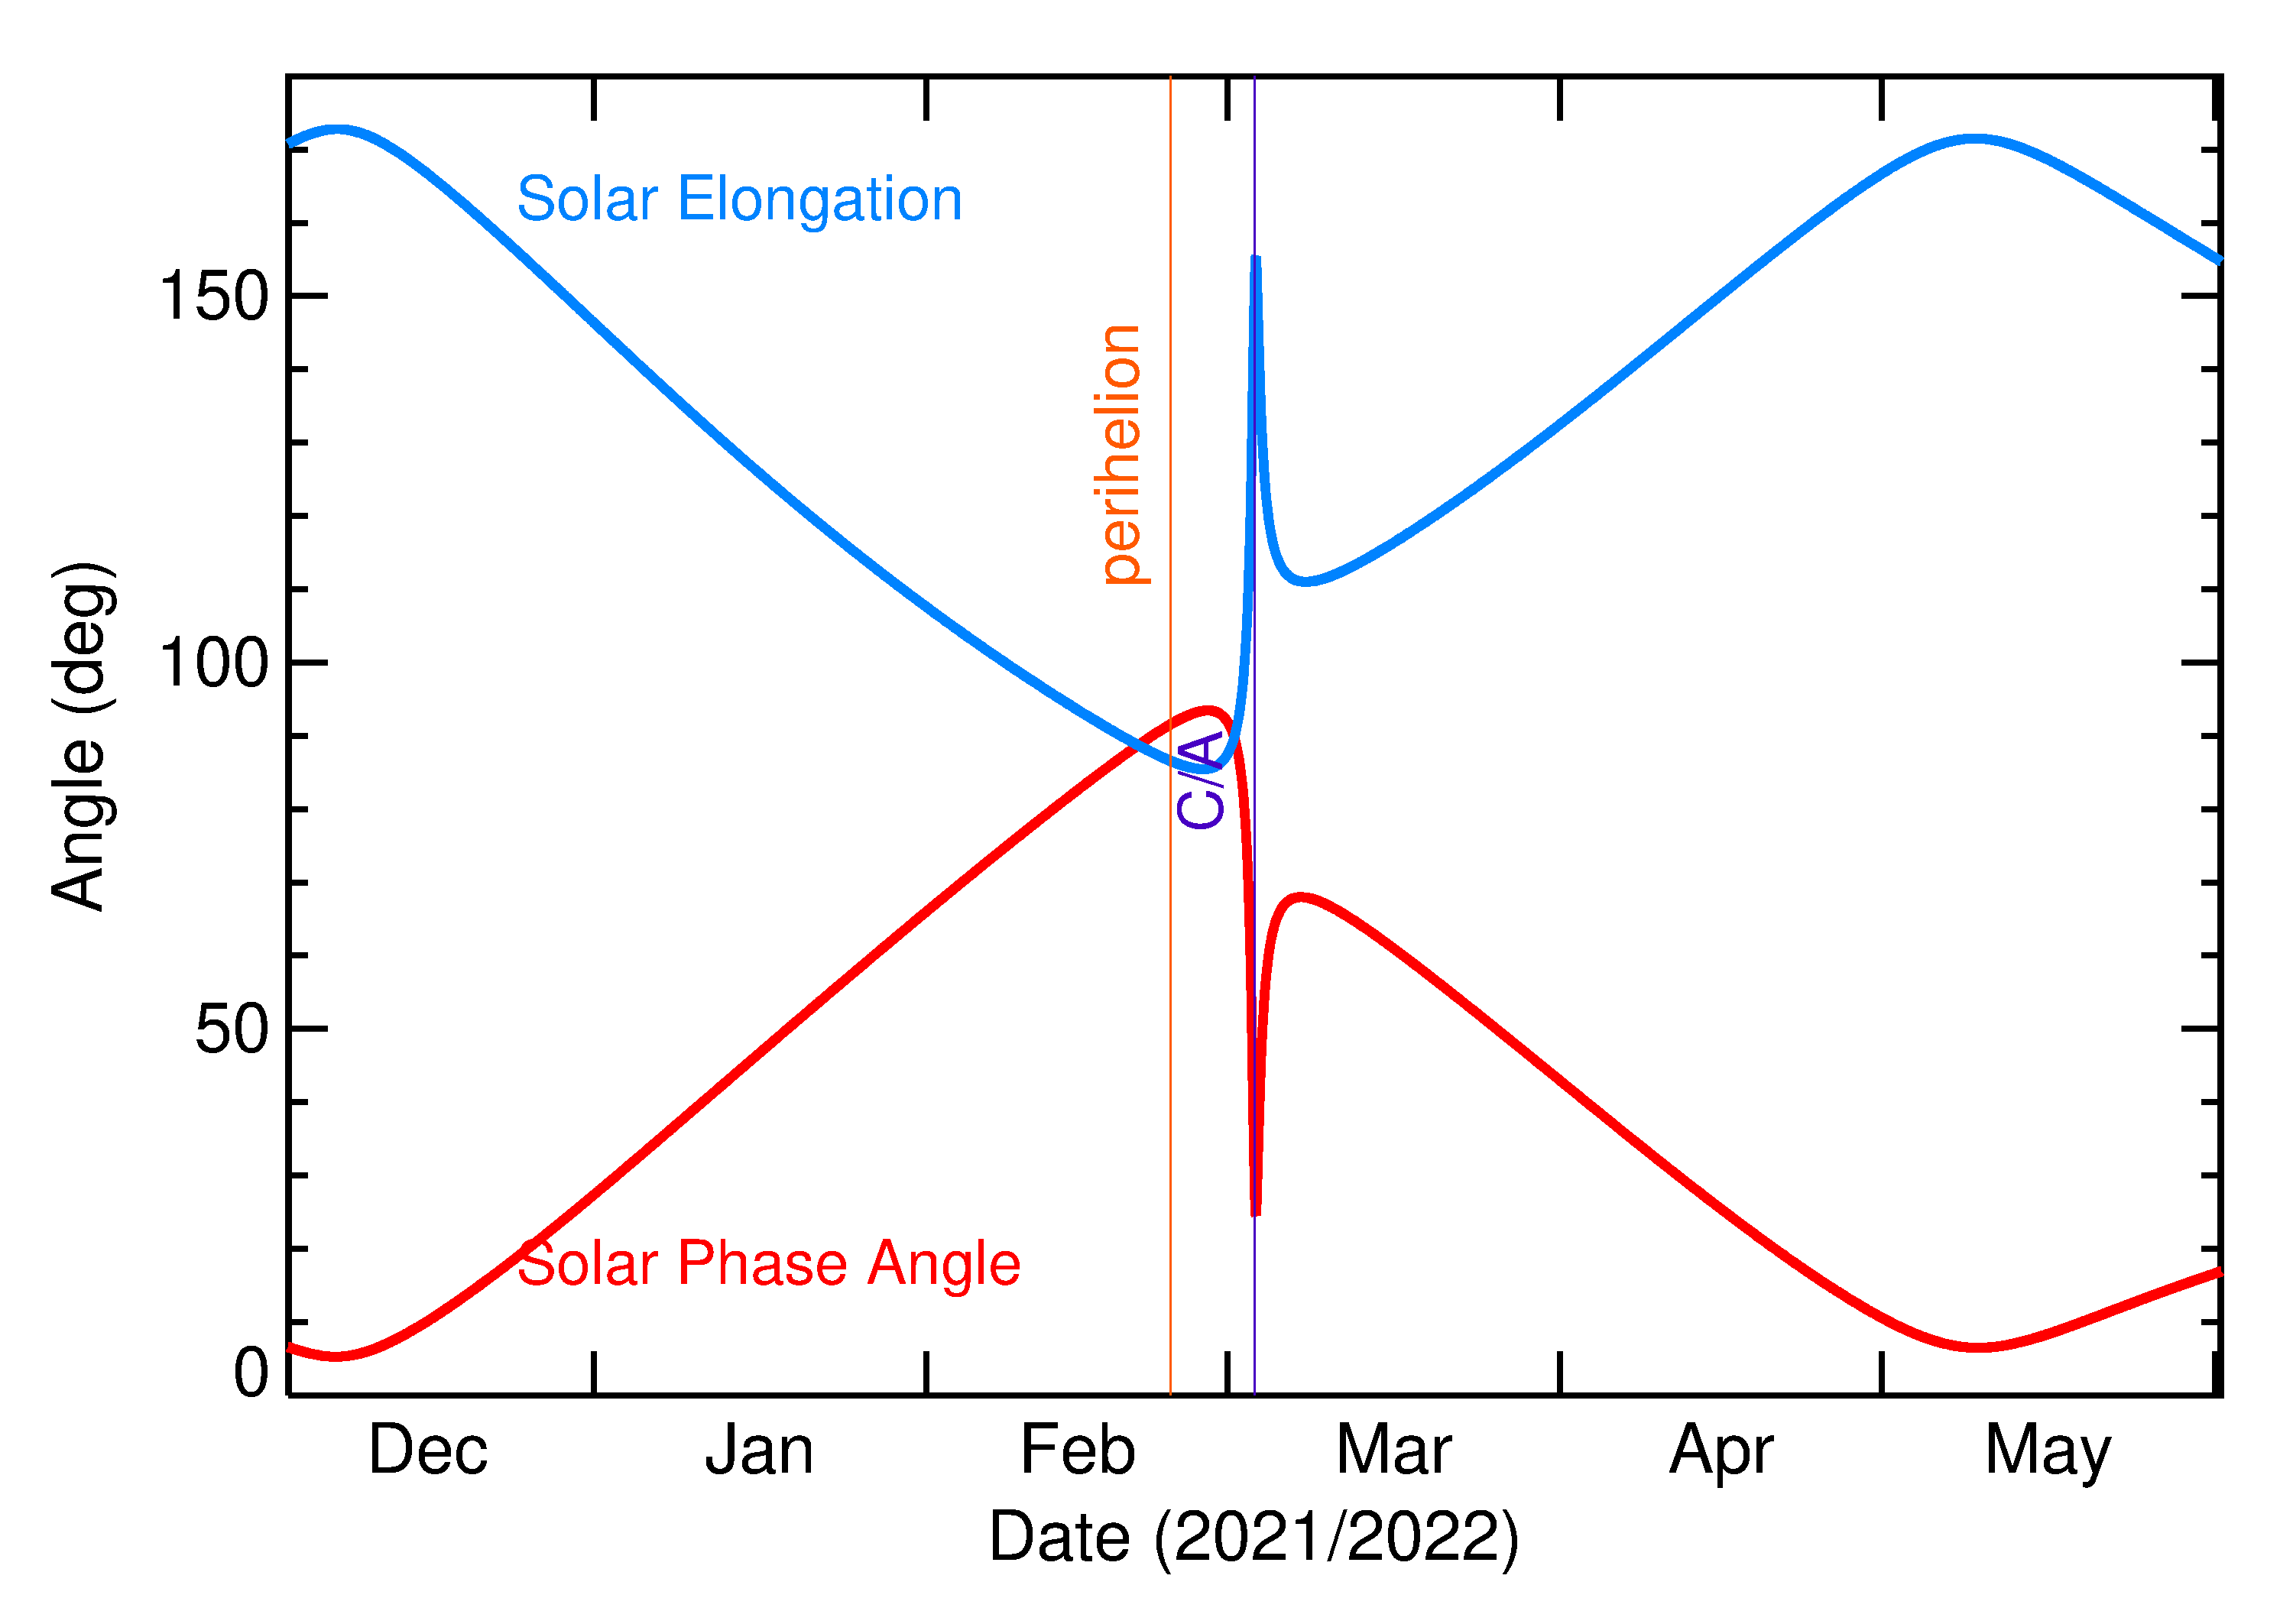 Solar Elongation and Solar Phase Angle of 2022 ET in the months around closest approach